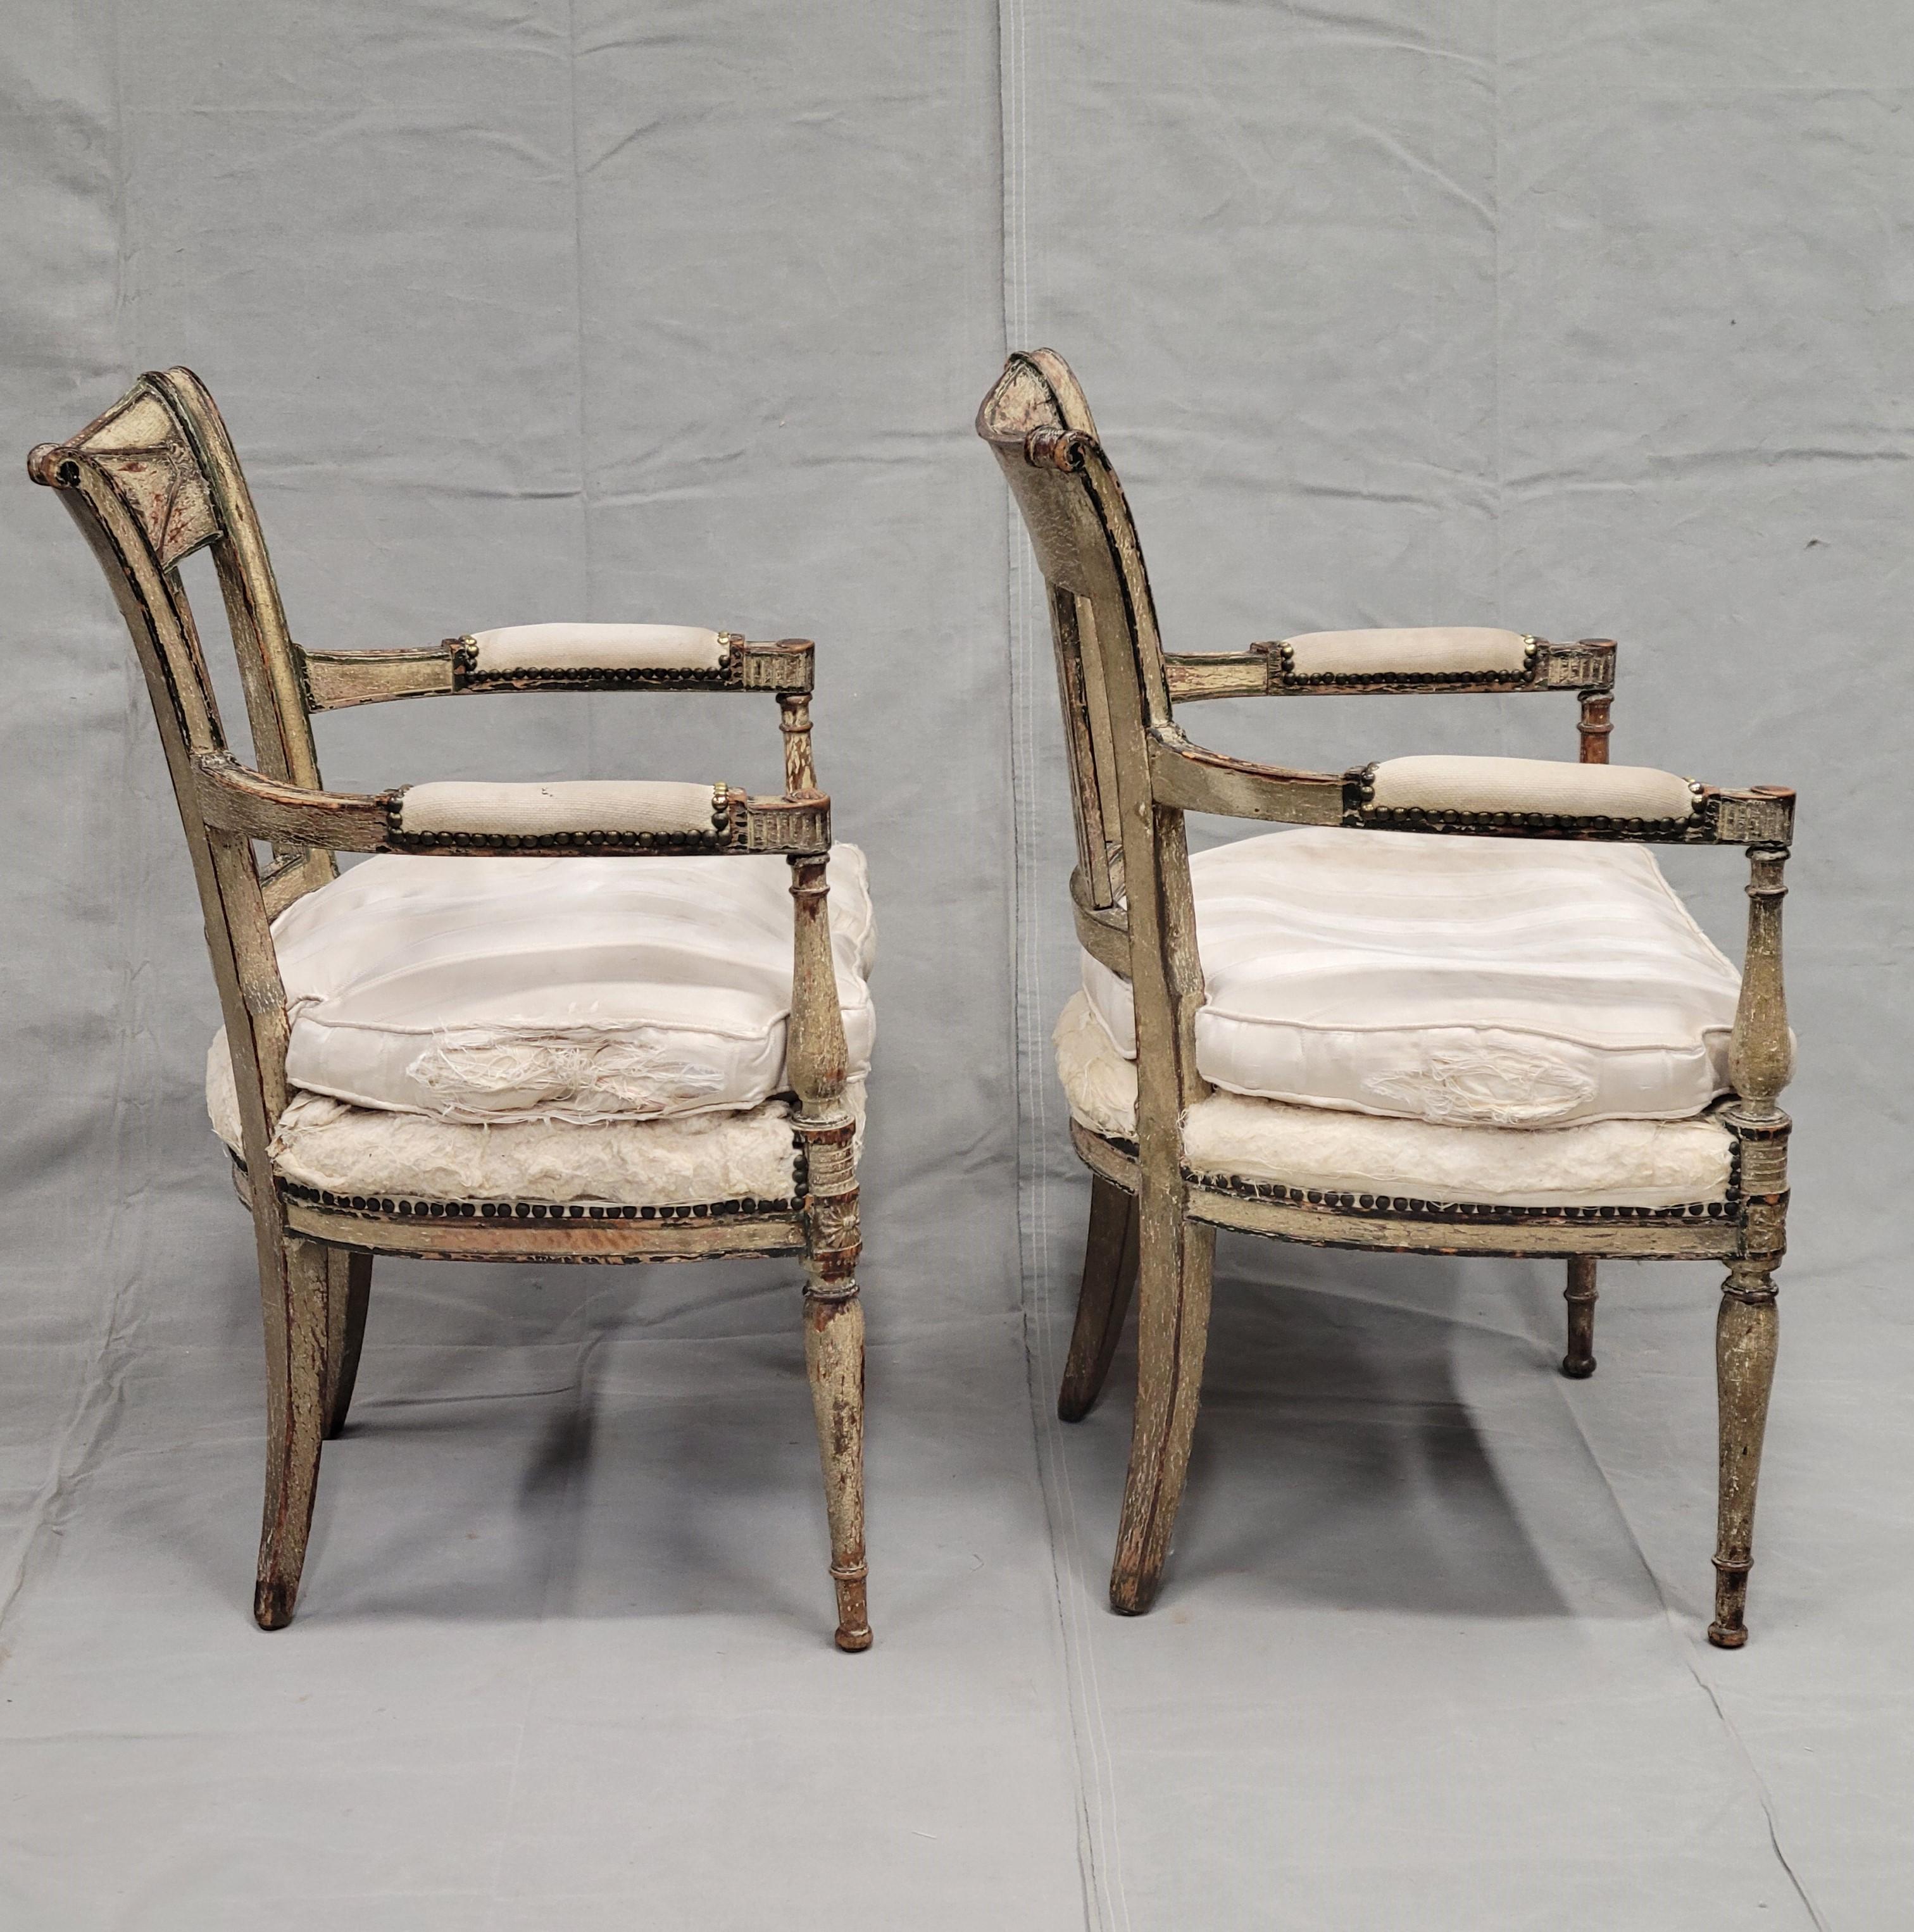 Hand-Crafted Antique Maison Jansen Style French Louis XVI Painted Fauteuil Chairs - a Pair For Sale